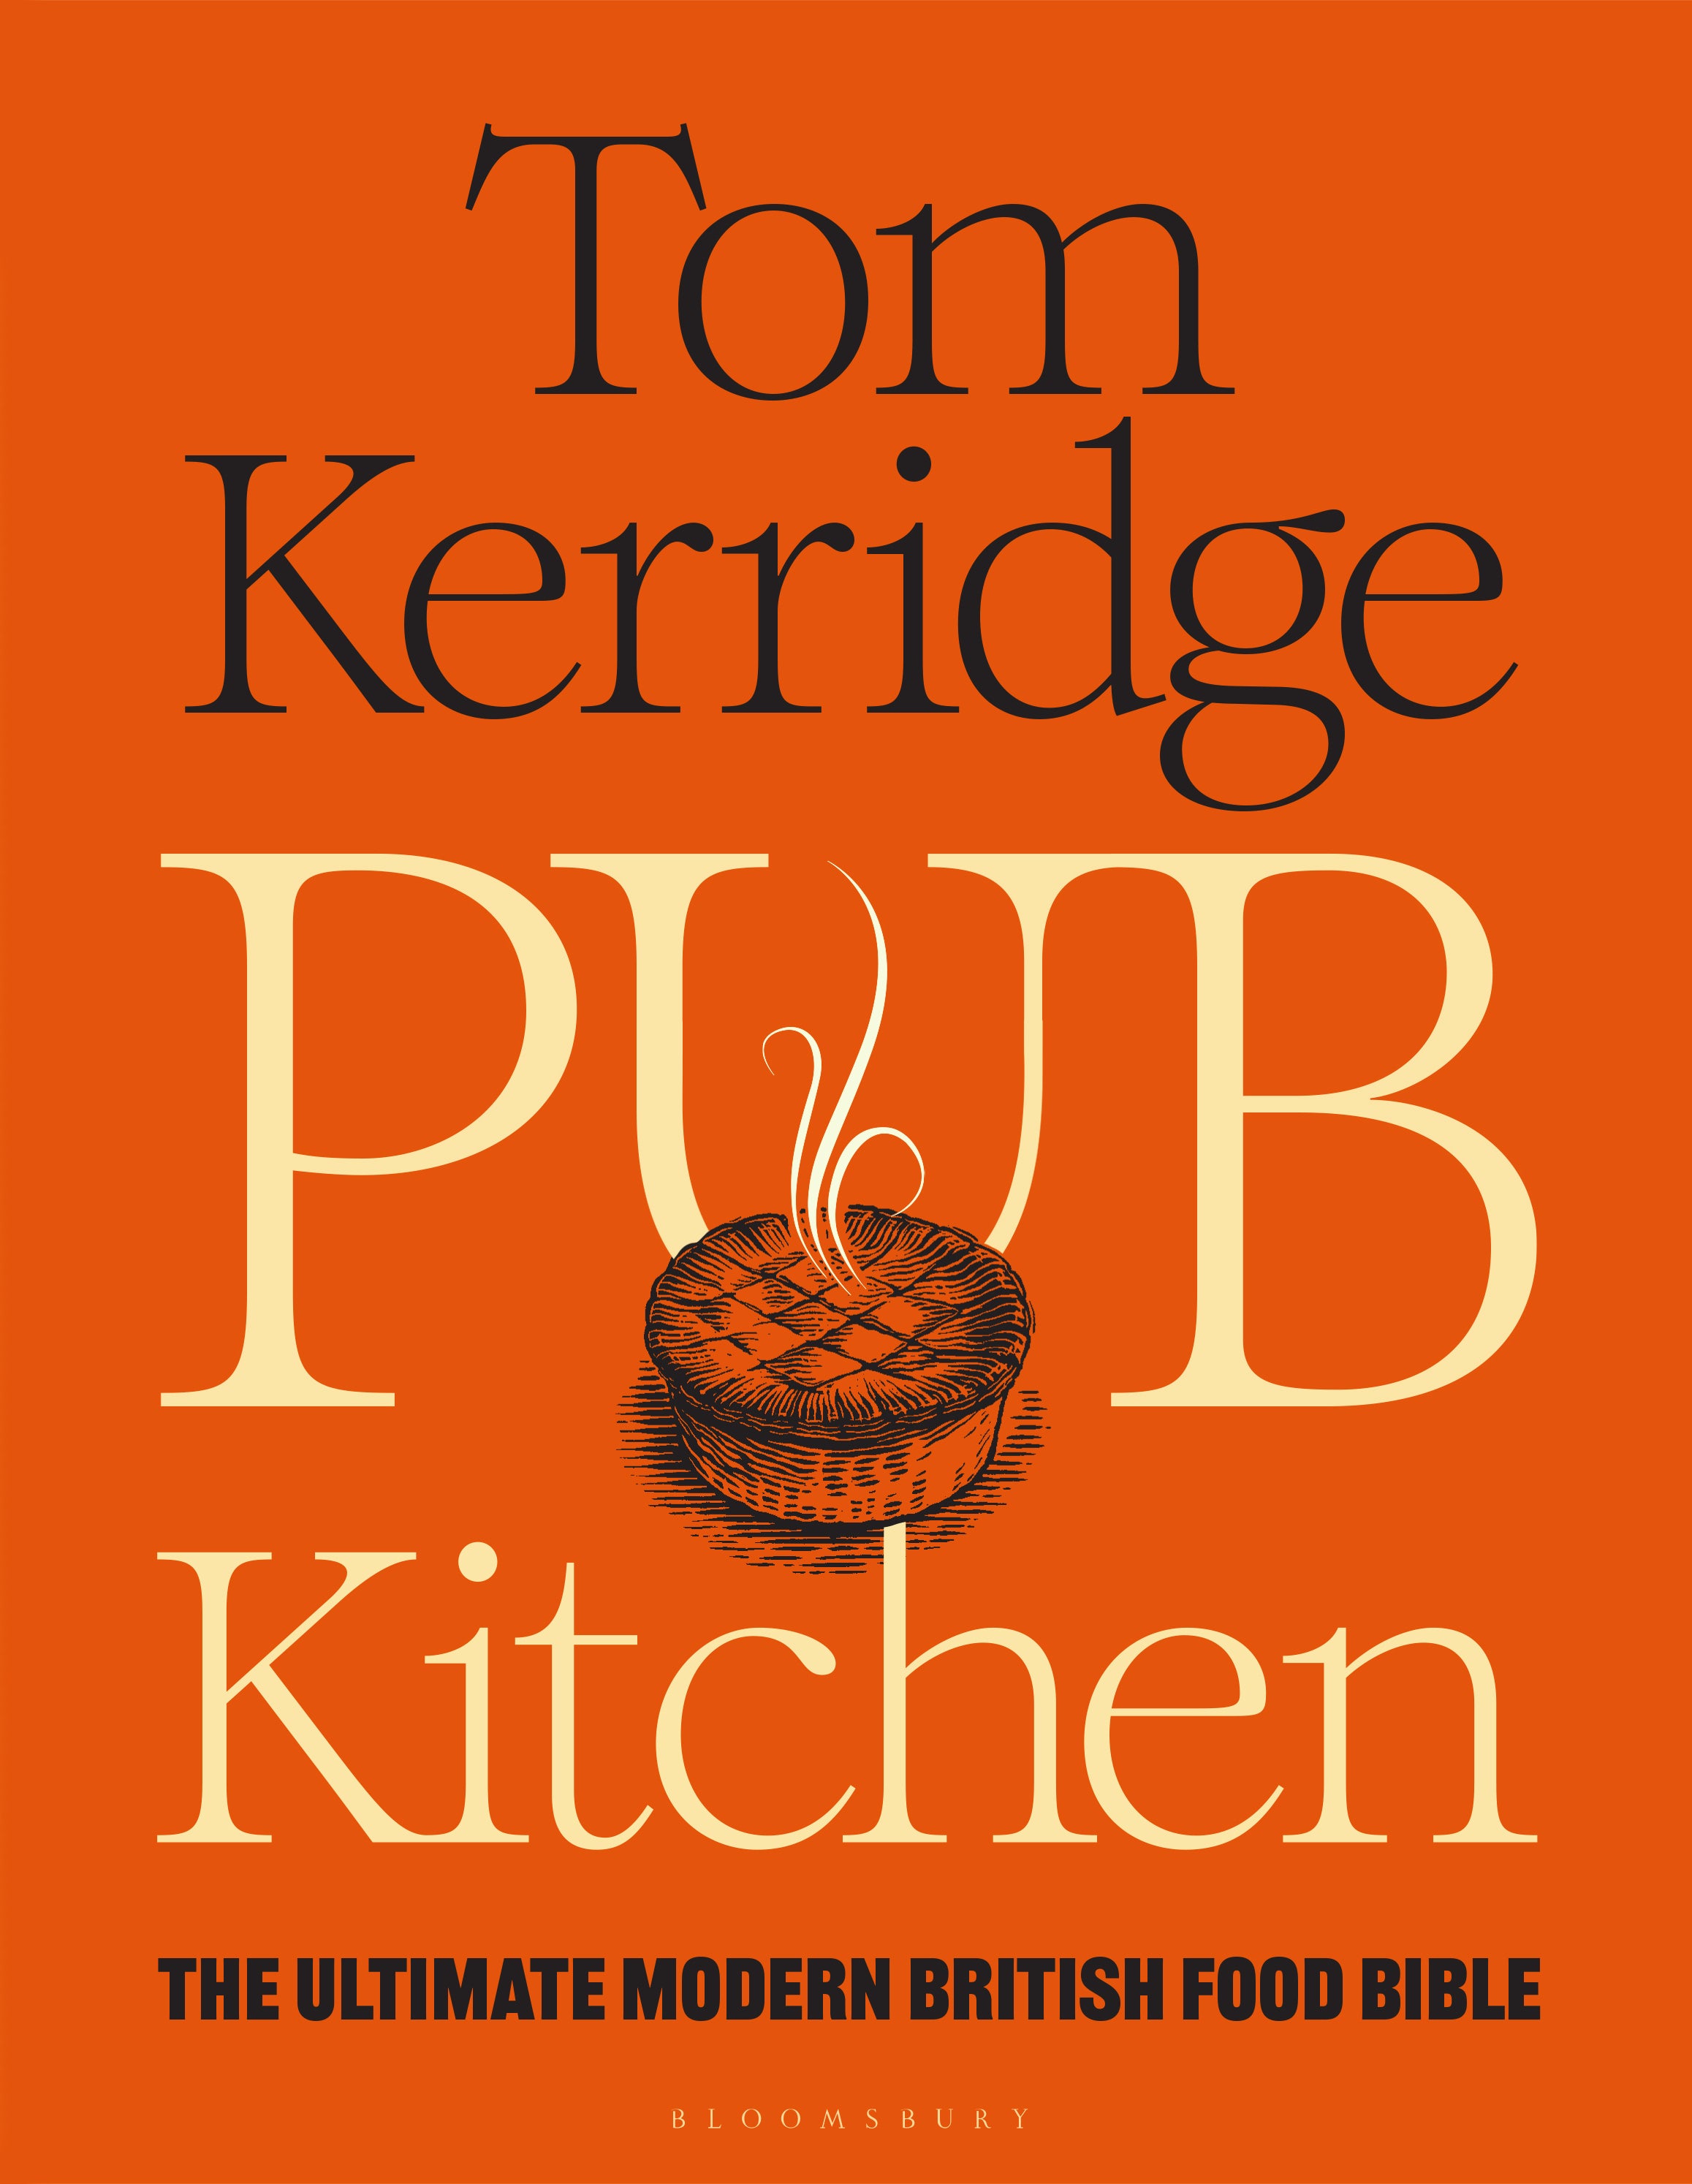 Recipes in the new book reflect just how much the pub landscape has changed over the past decade